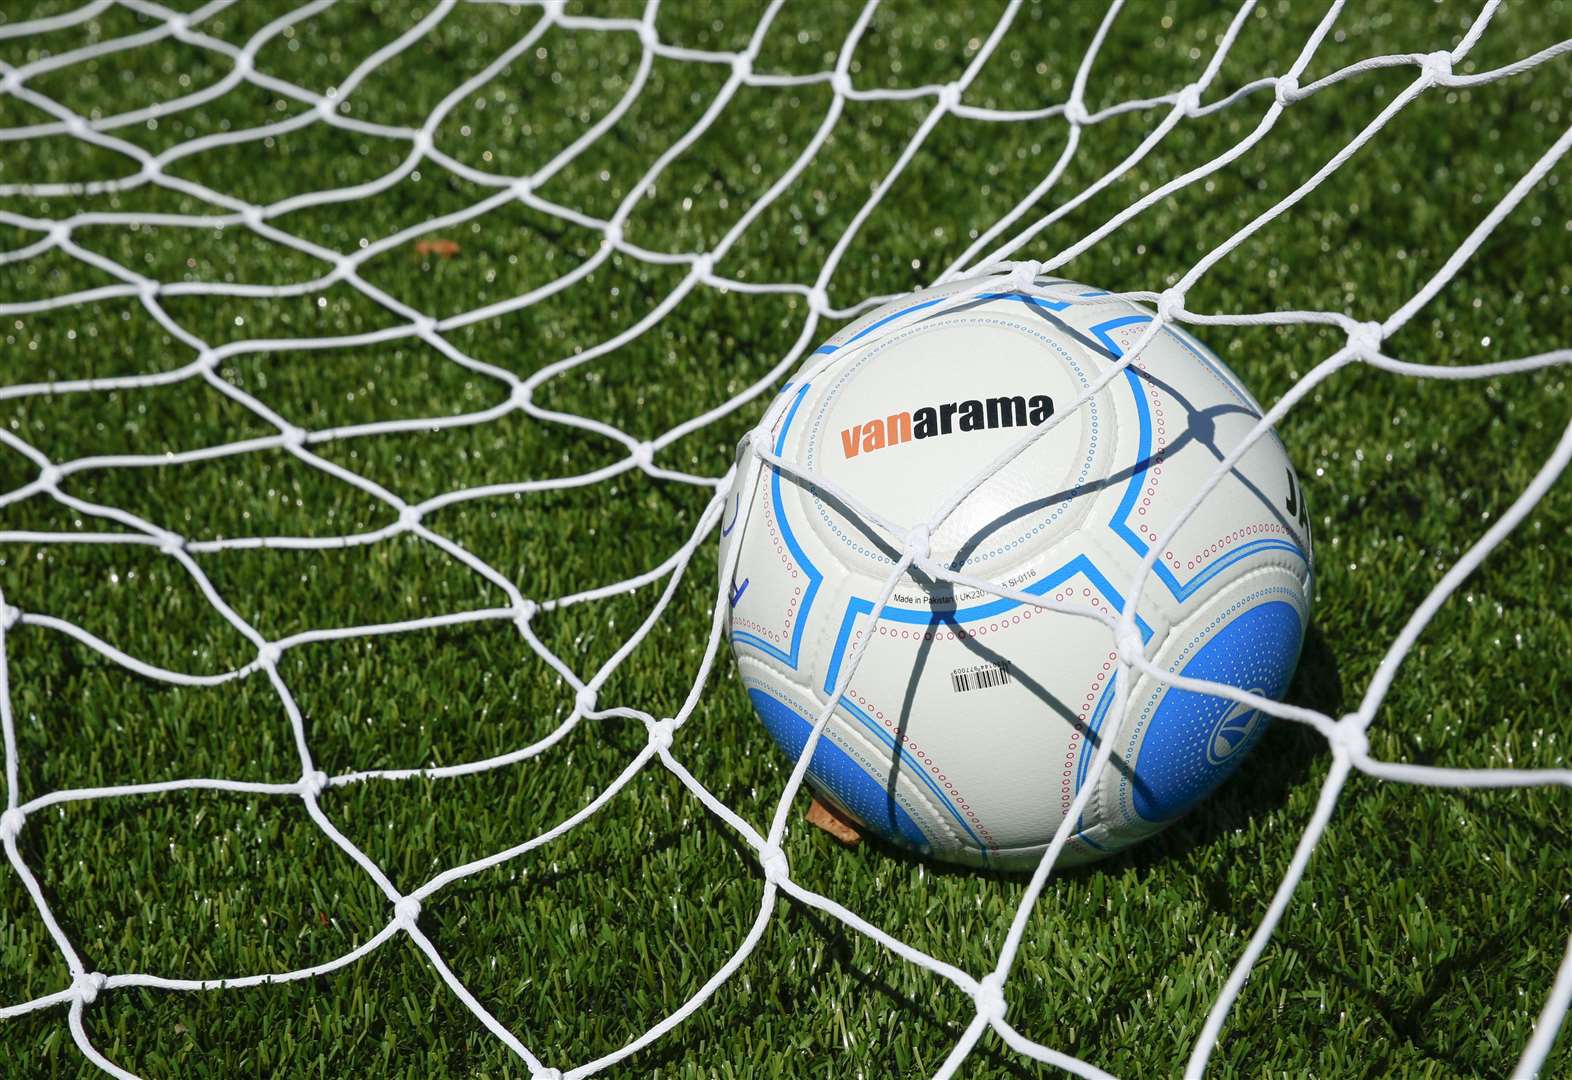 Football fixtures and results - Friday November 23 to Wednesday November 28